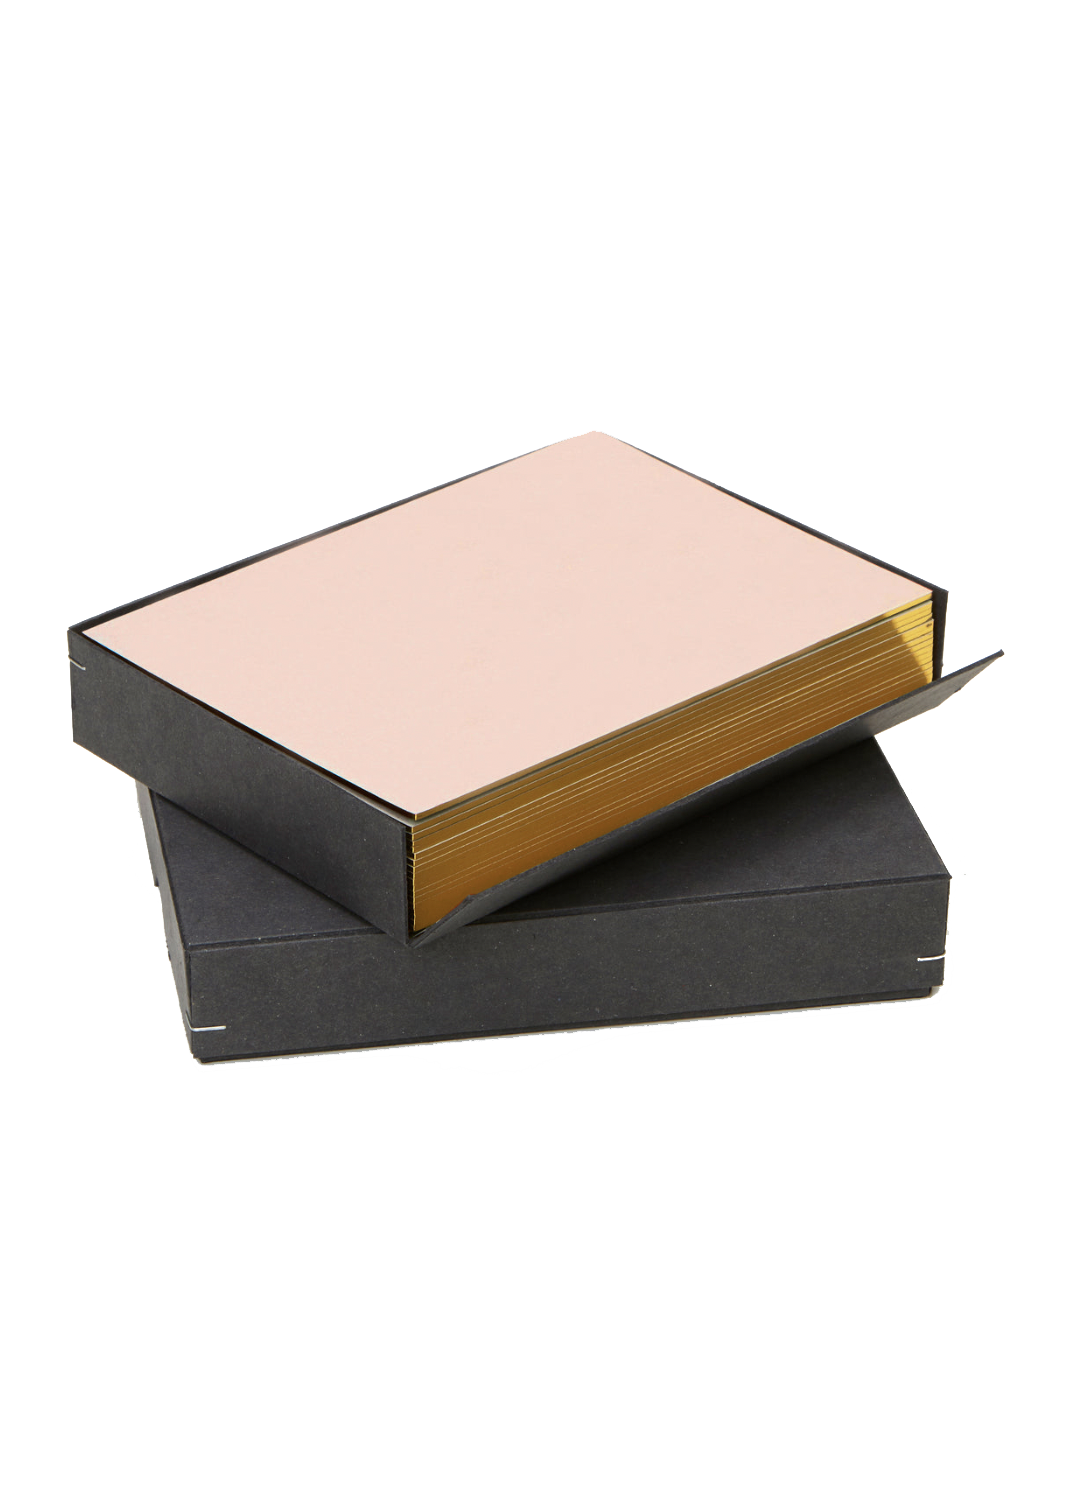 Notecard Set: Blush with Gold Edges